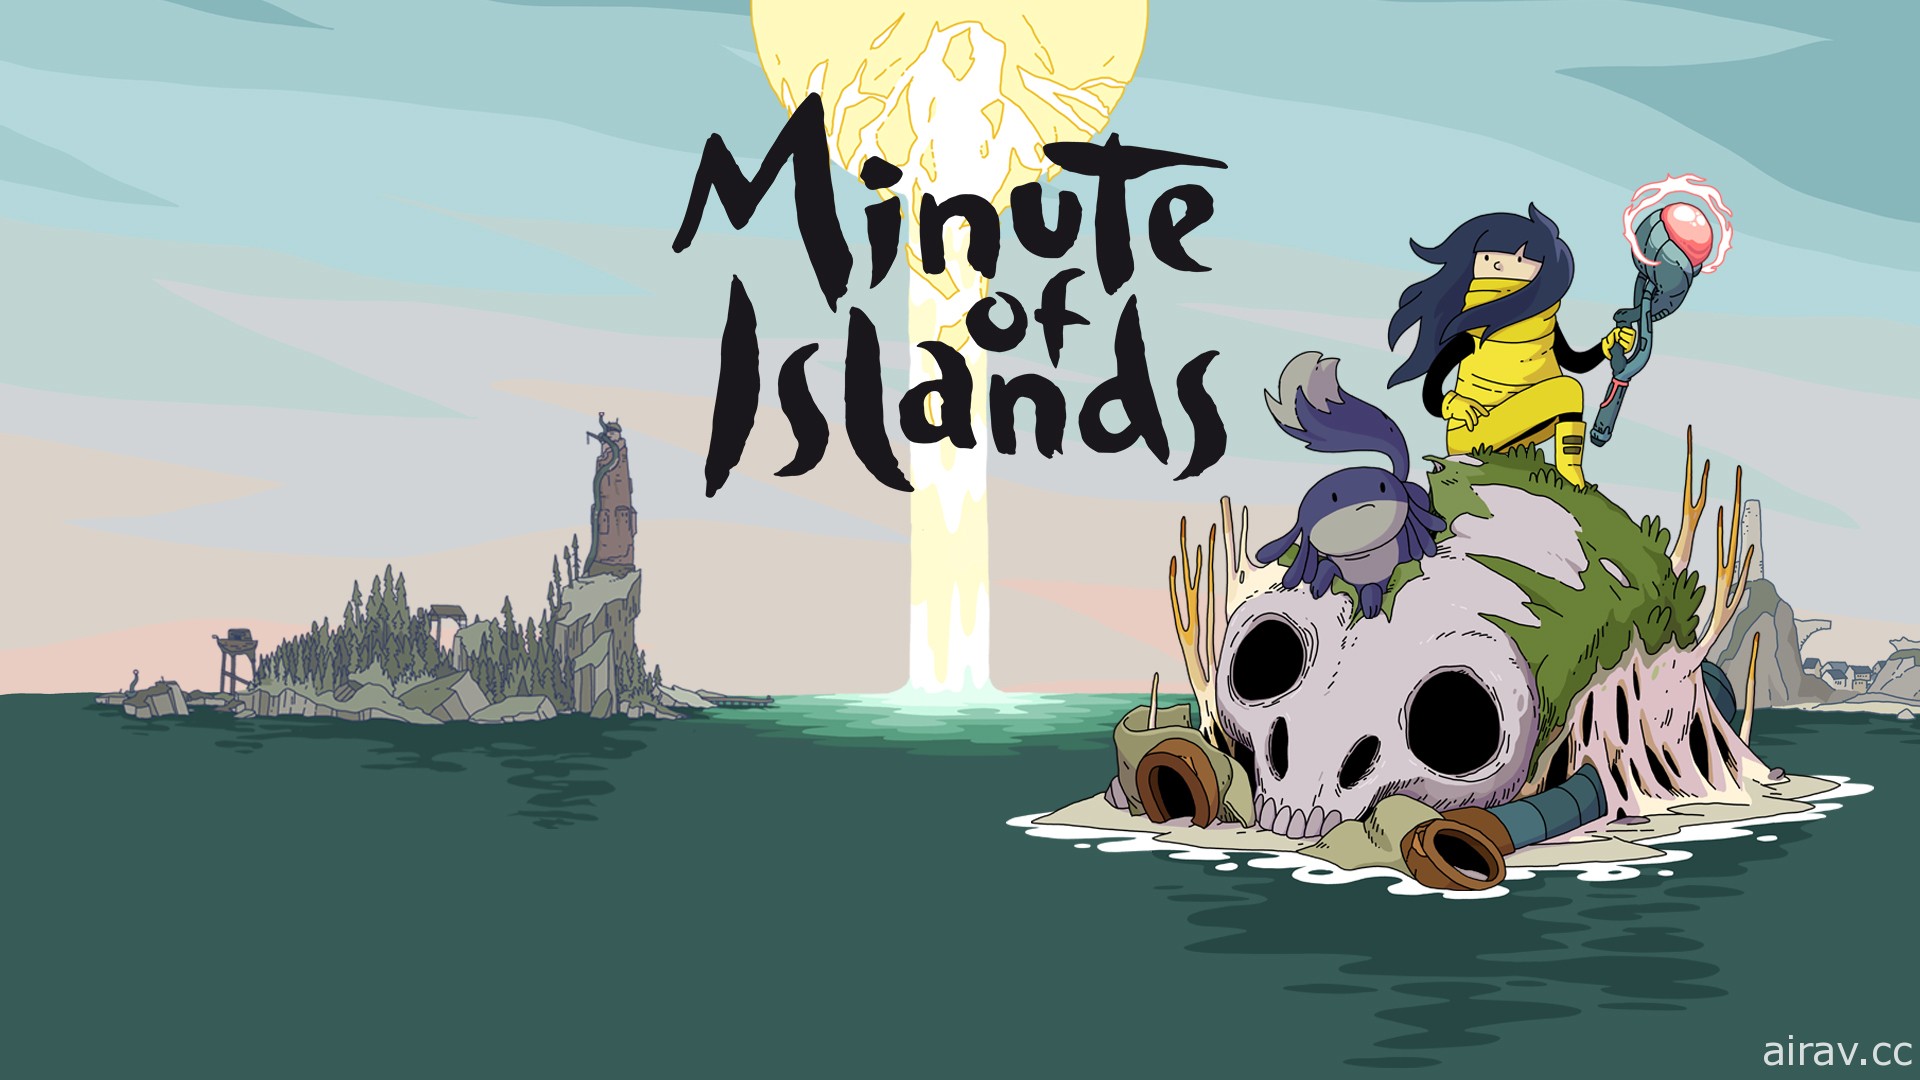 《Minute of Islands》PS4 中文版 6 月 14 日上市